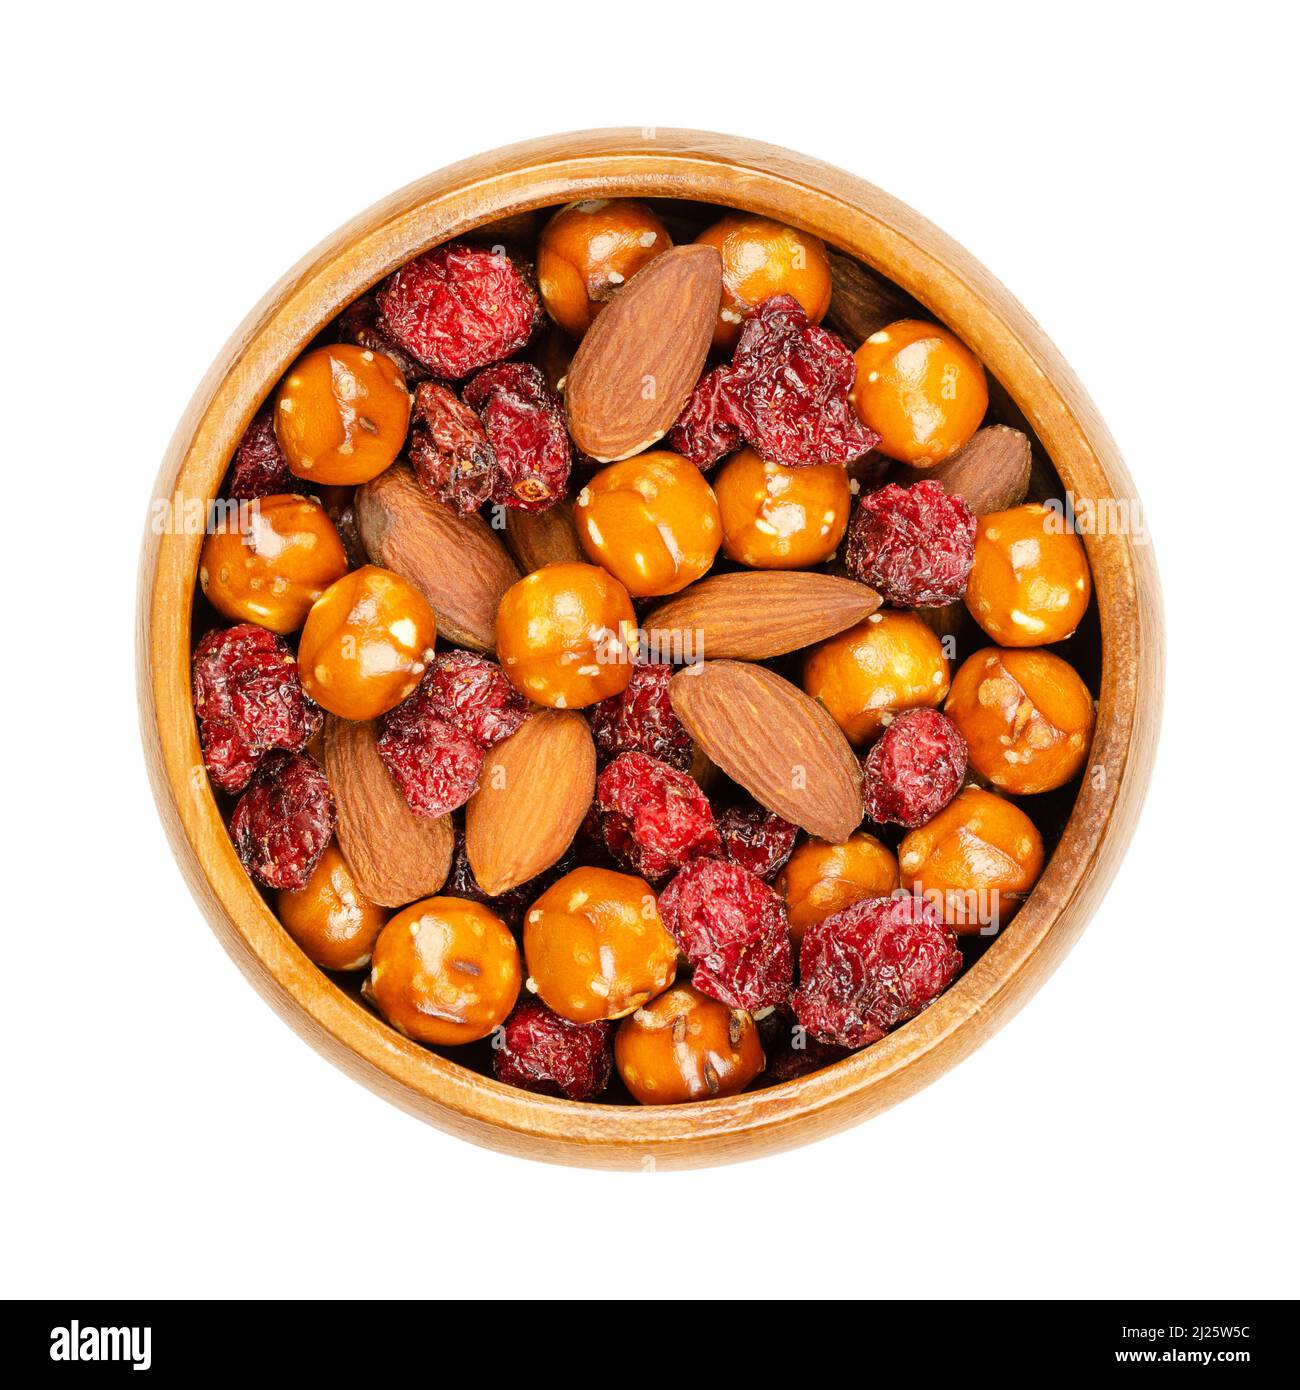 Crunchy mix, in a wooden bowl. Crunchy mix of salted pretzel balls, roasted almonds and baked cranberries. Close-up, from above. Stock Photo